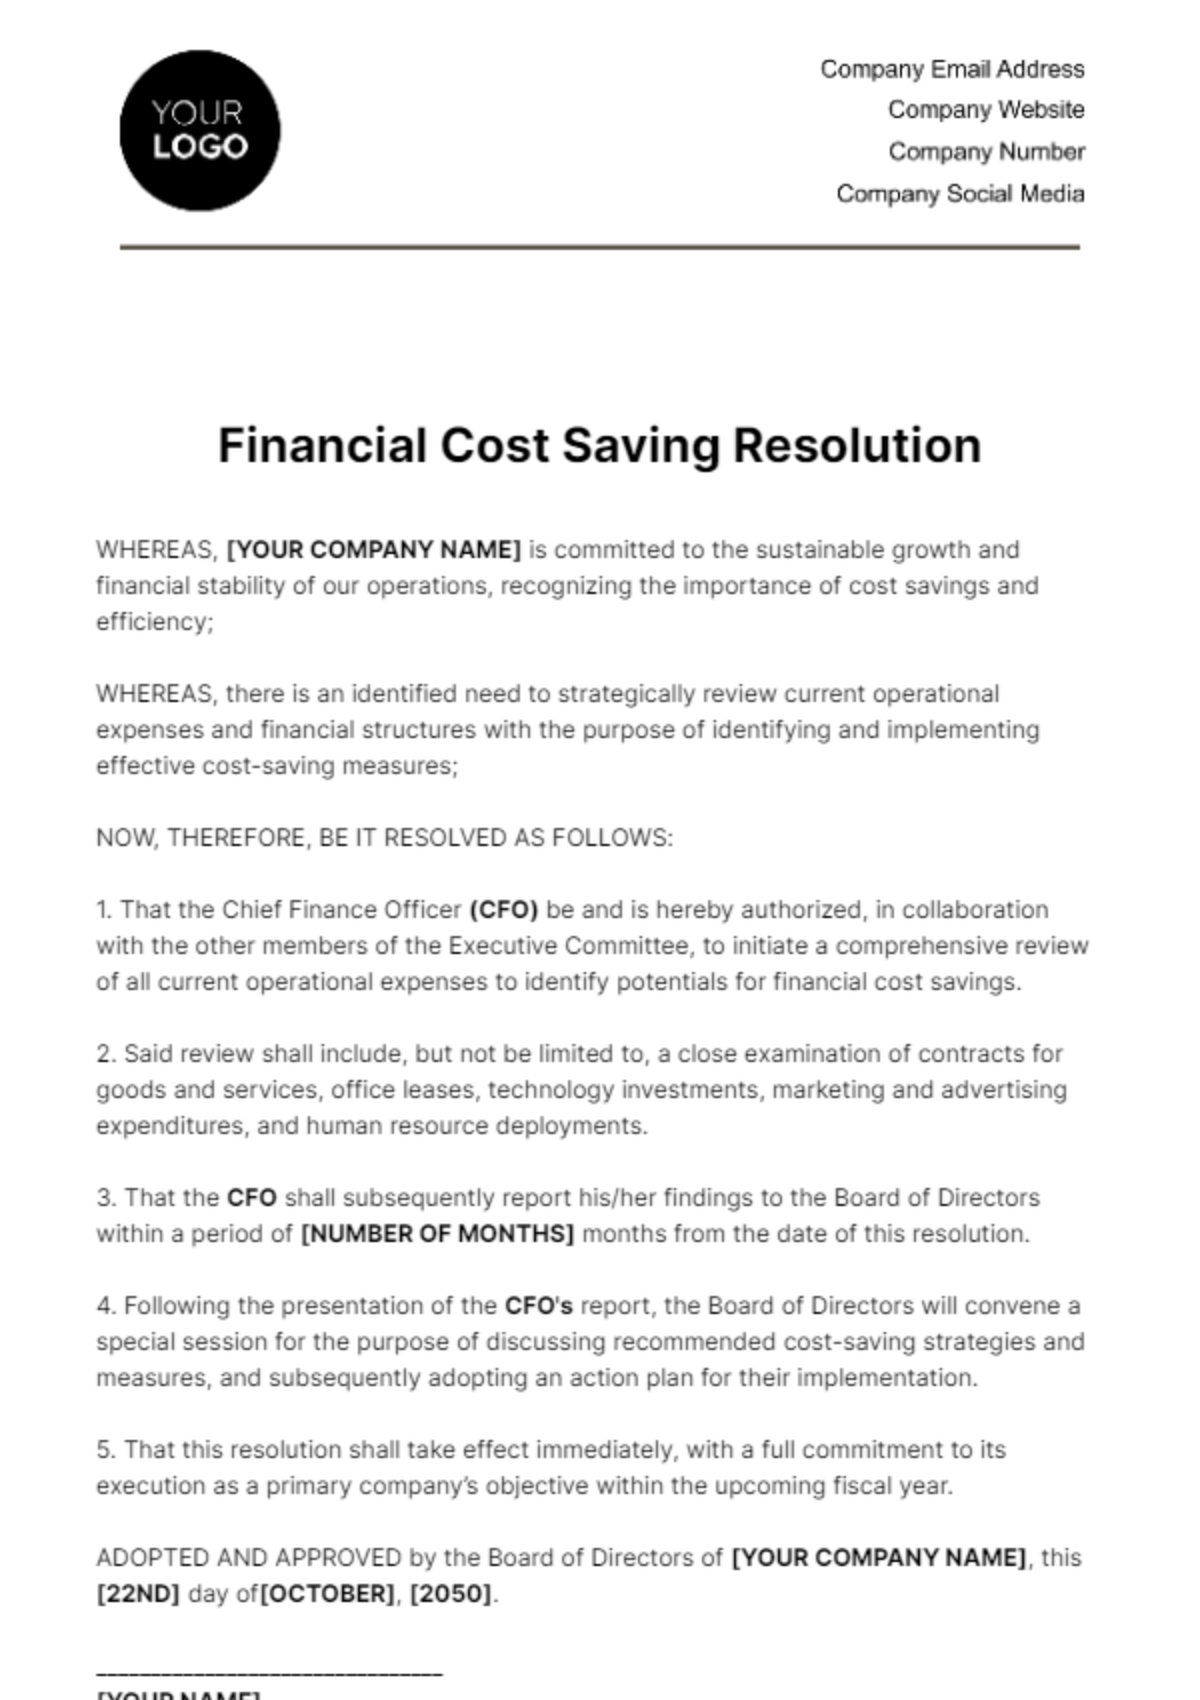 Financial Cost Saving Resolution Template